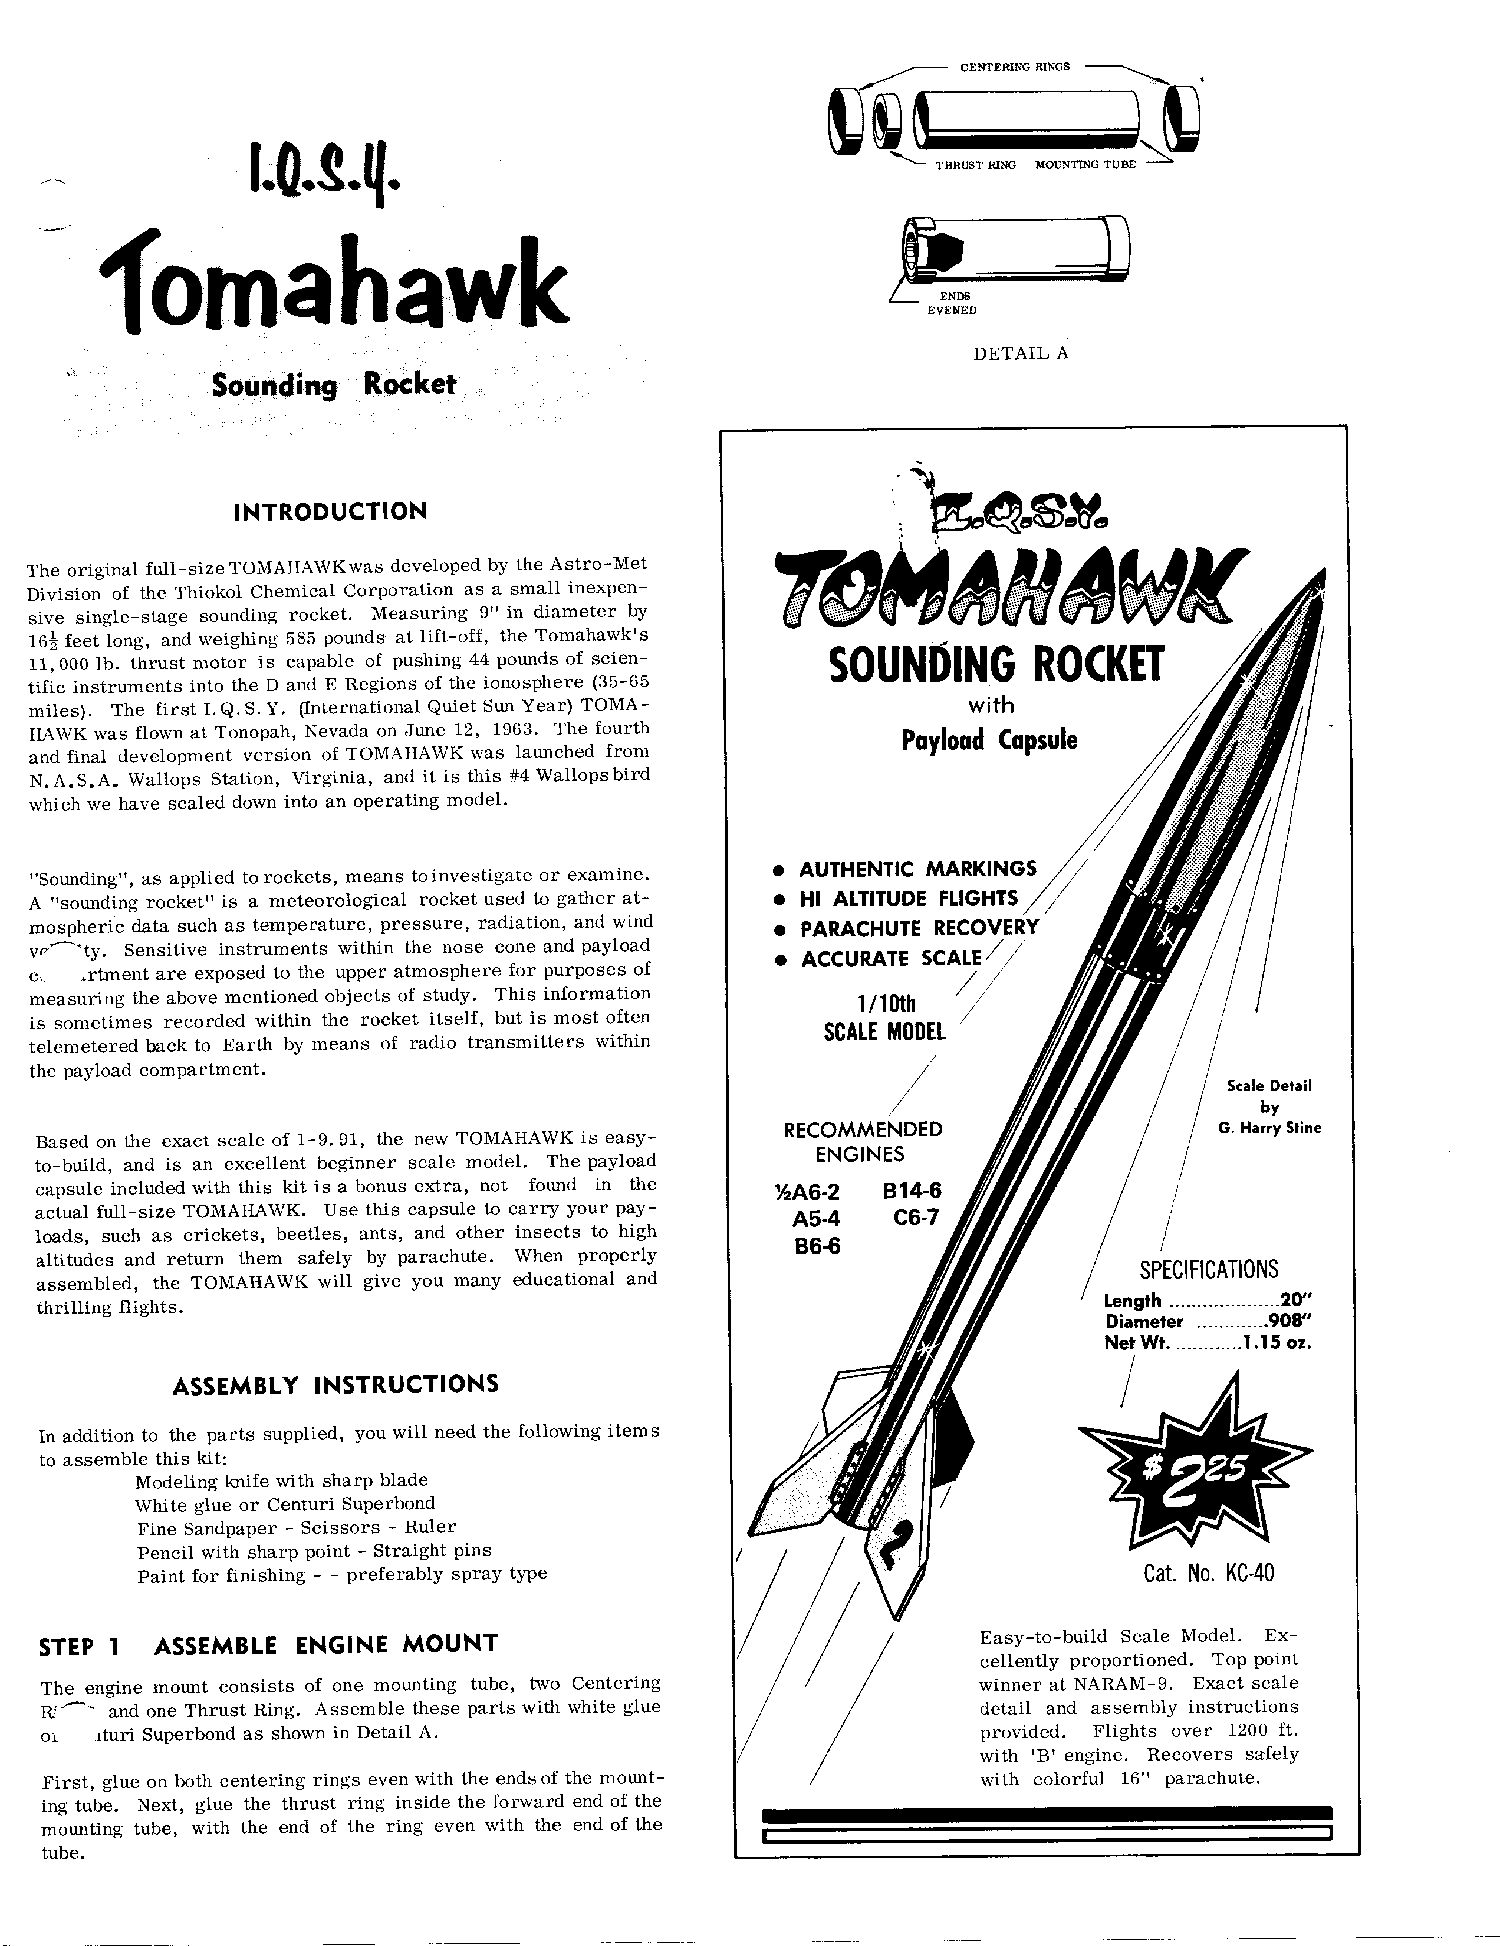 Tomahawk Page 1